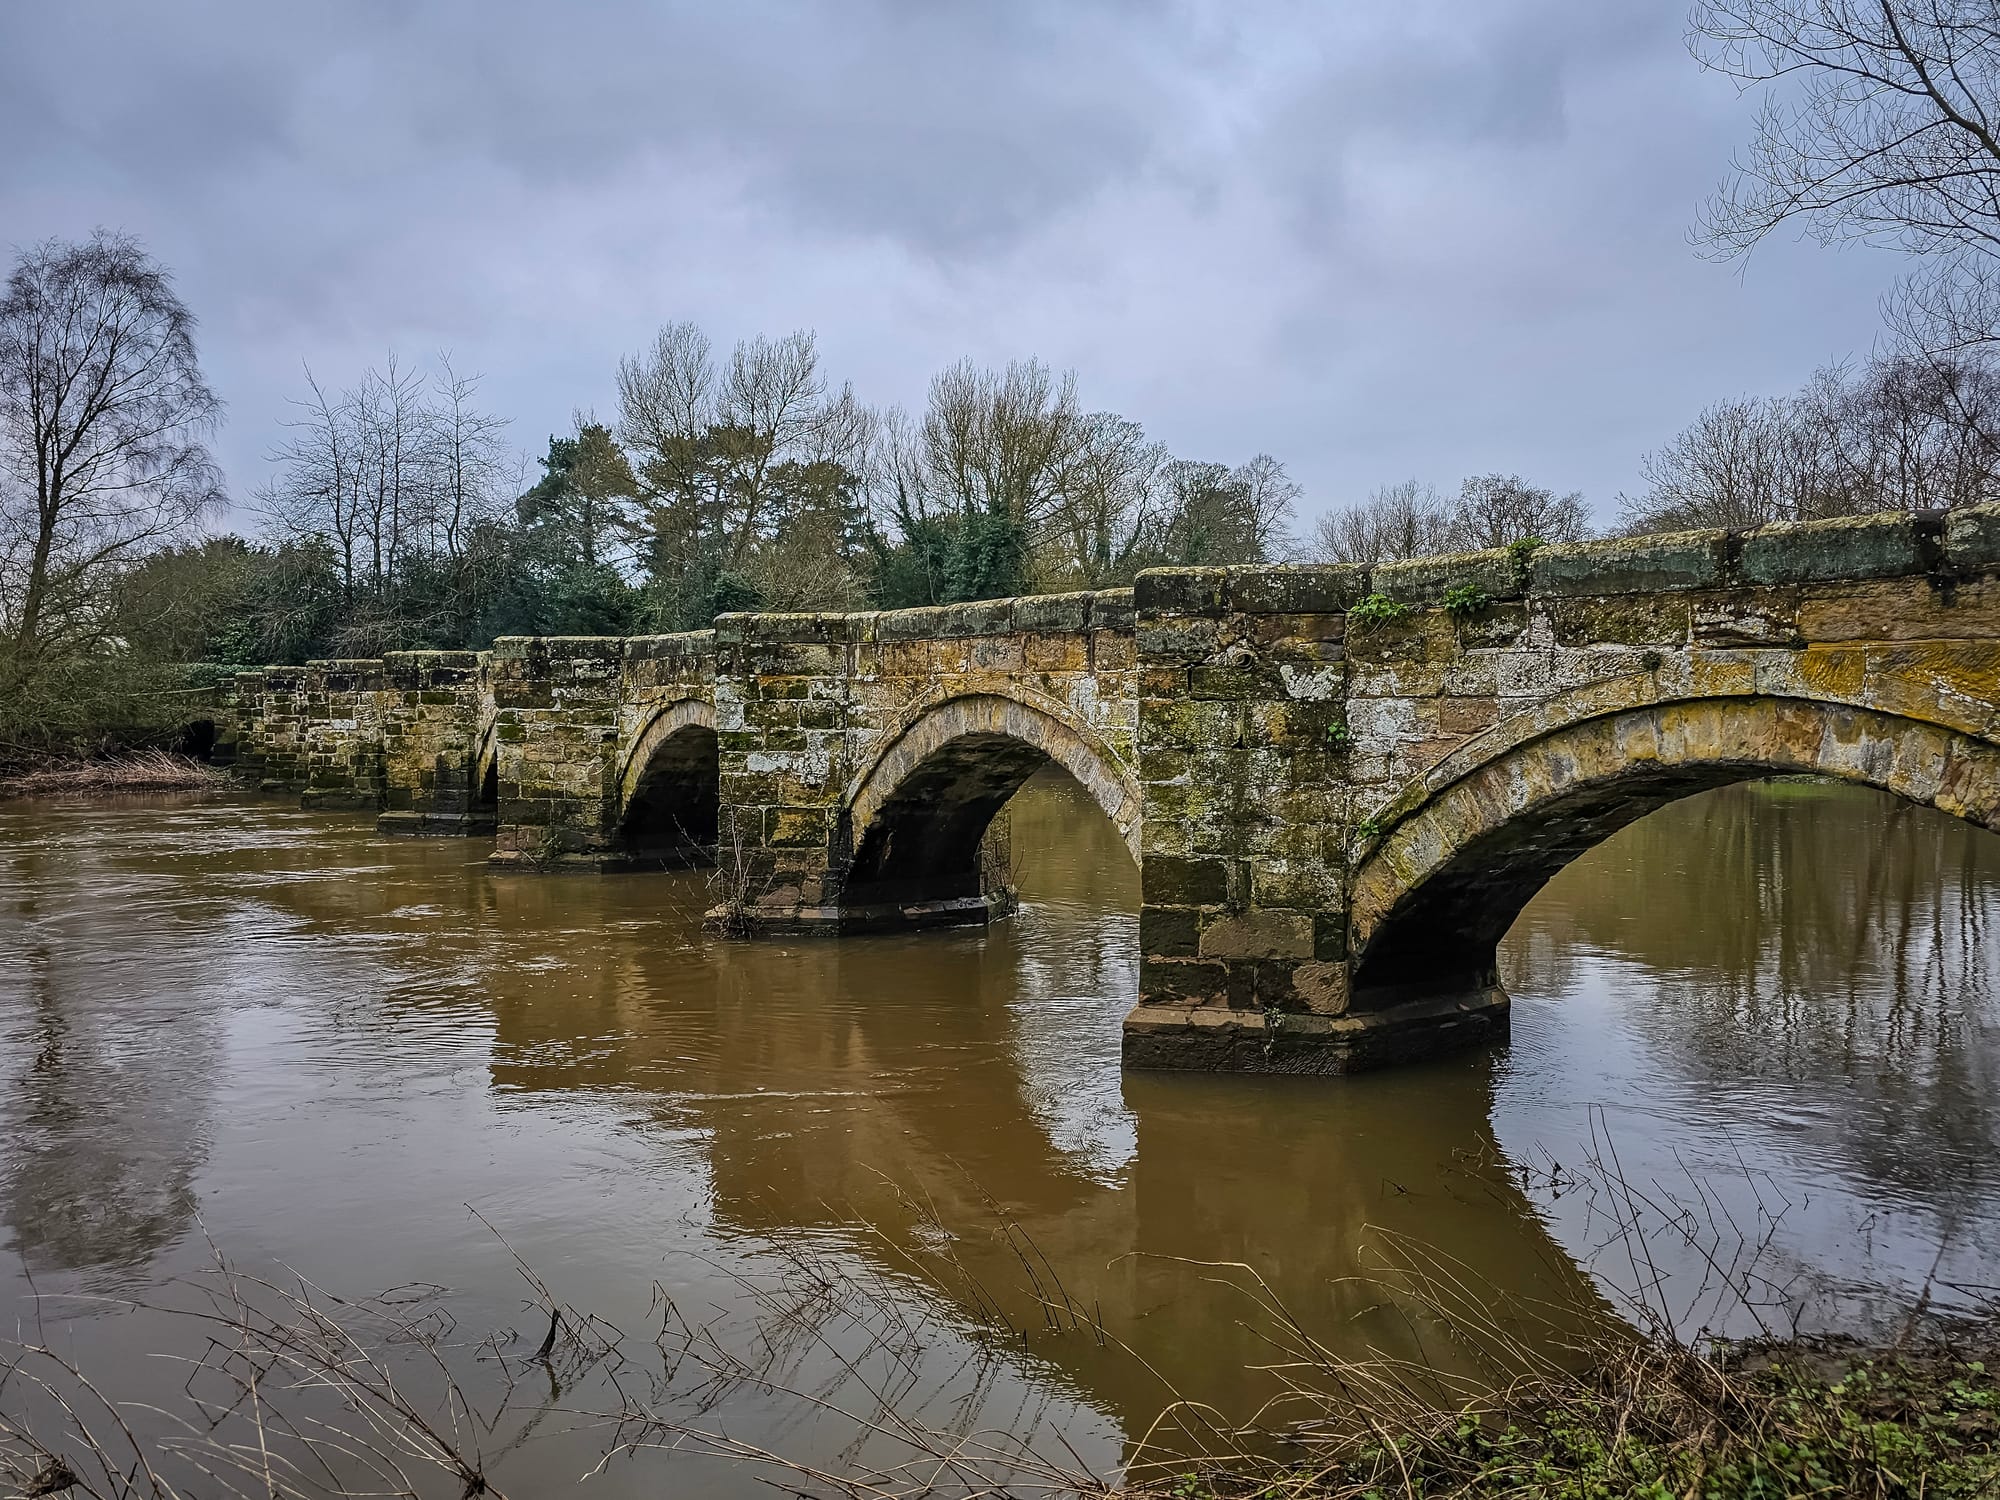 From Royalty to Tolkien: The Story of Essex Bridge in Staffordshire